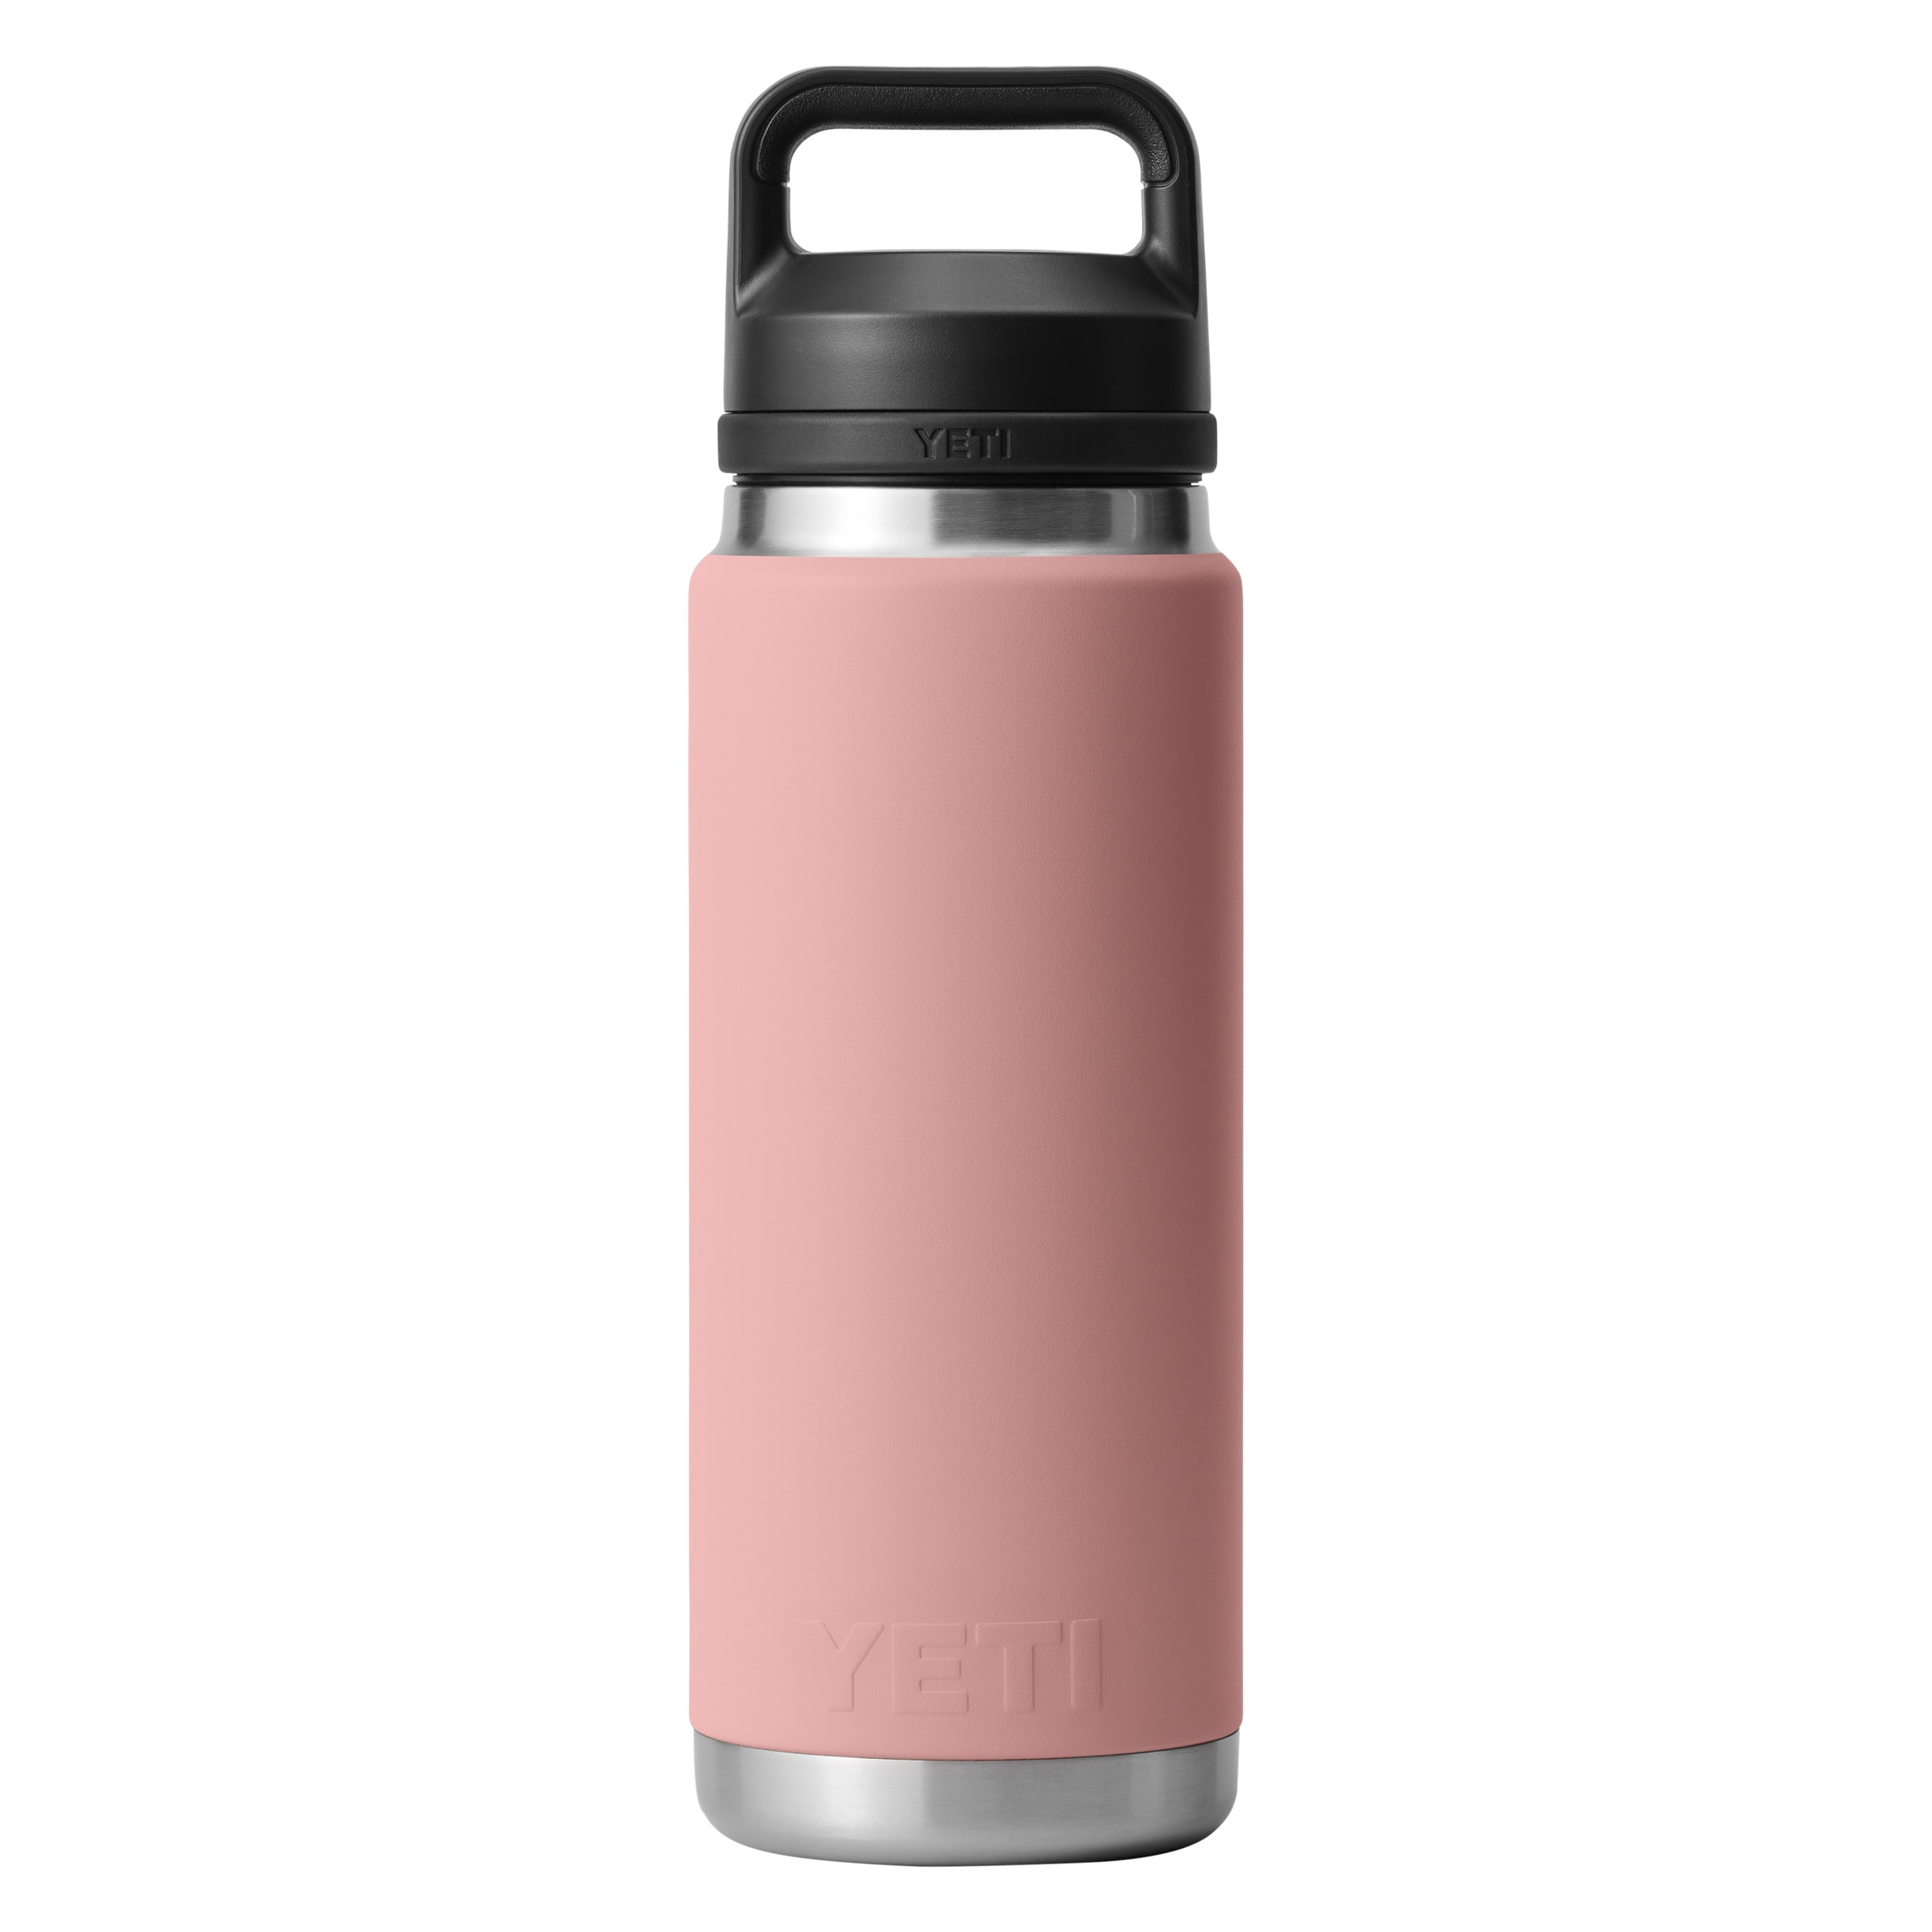 YETI Rambler 26 oz Straw Cup, Vacuum Insulated, Stainless  Steel with Straw Lid, Power Pink: Tumblers & Water Glasses